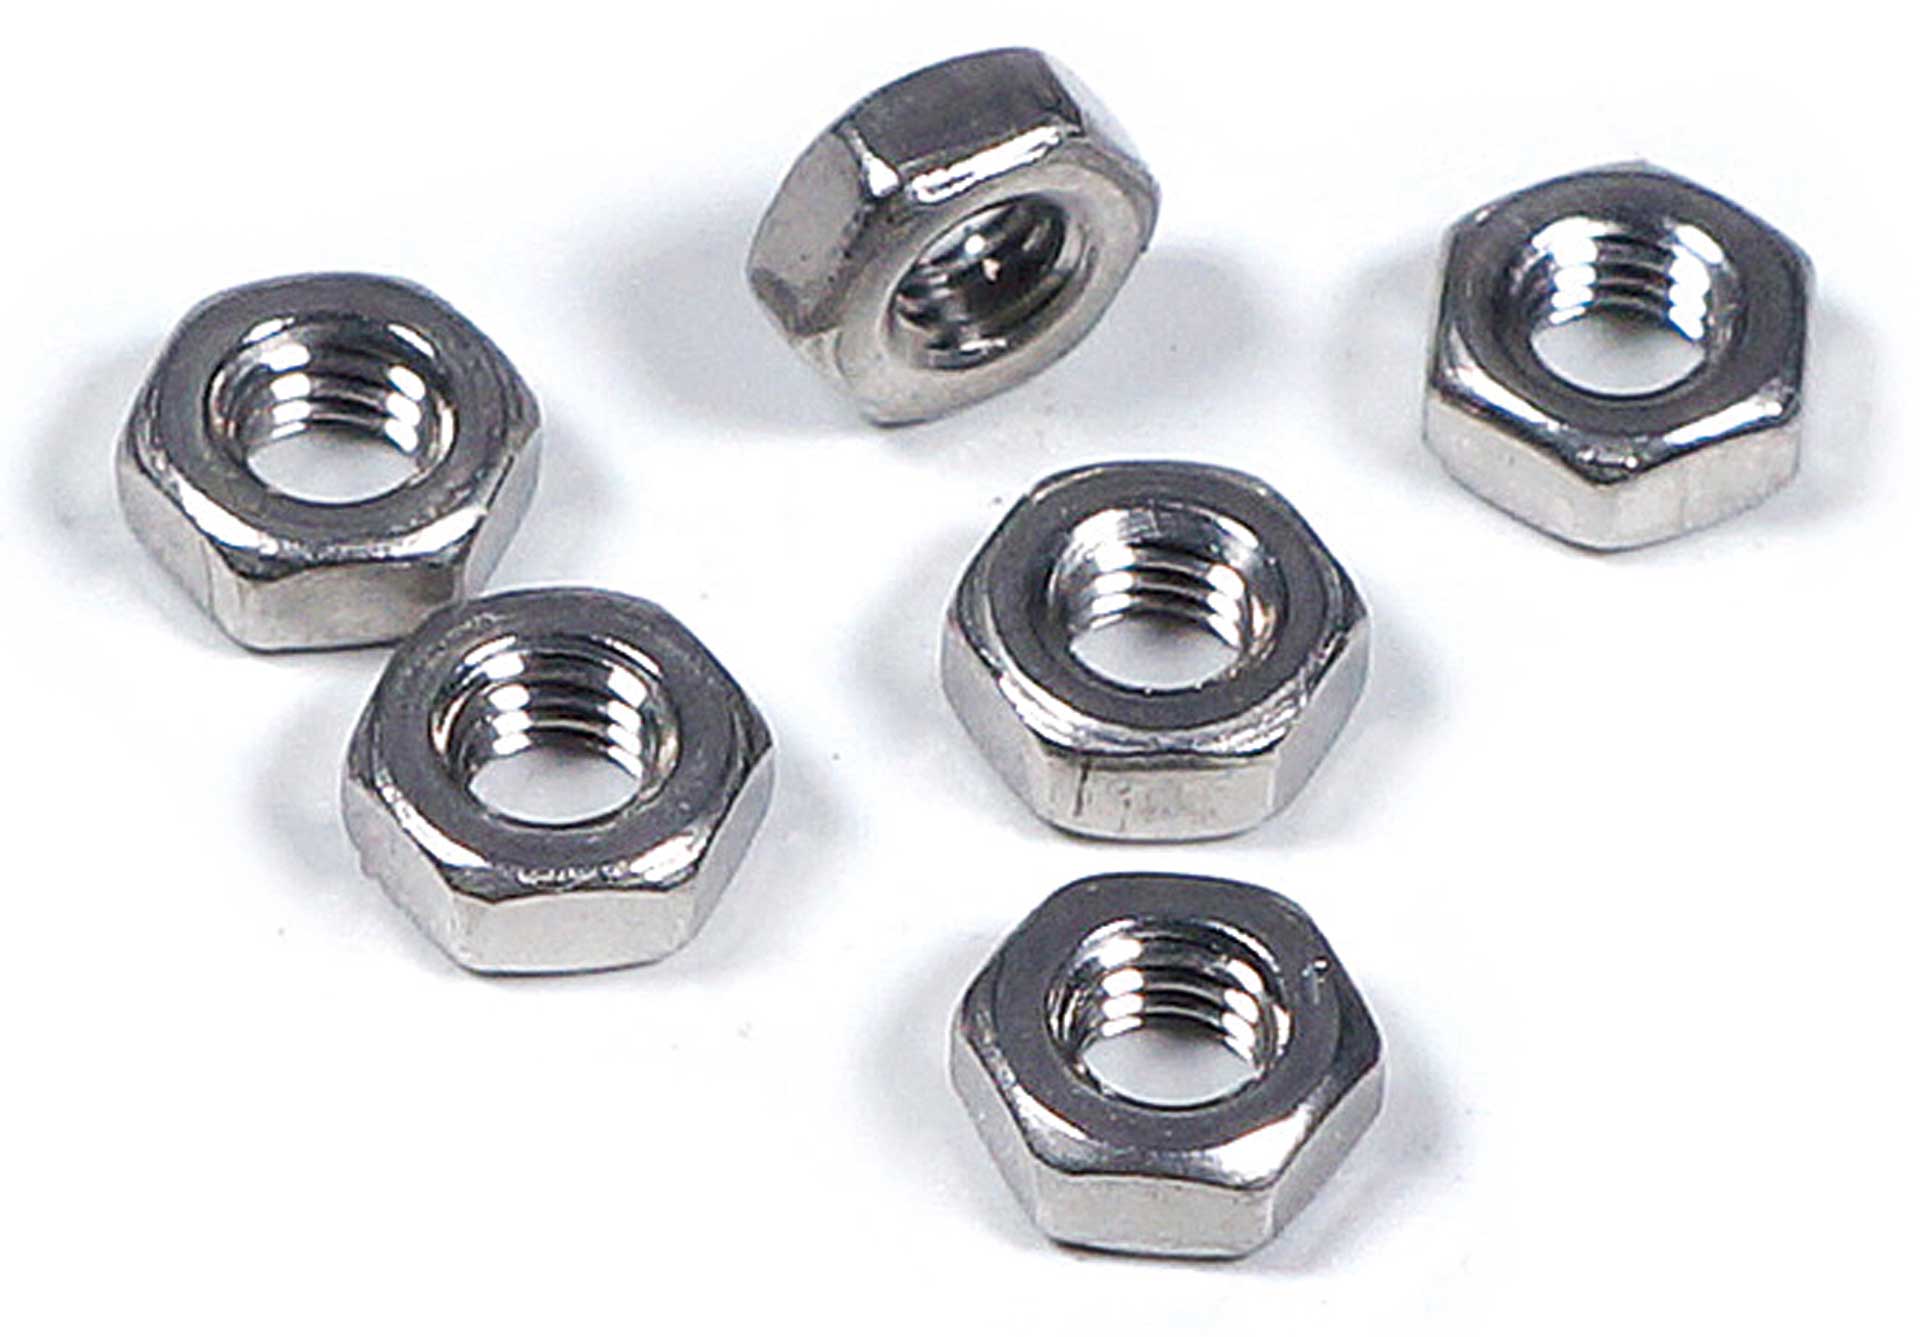 Robbe Modellsport Nuts M6 30pcs. stainless steel